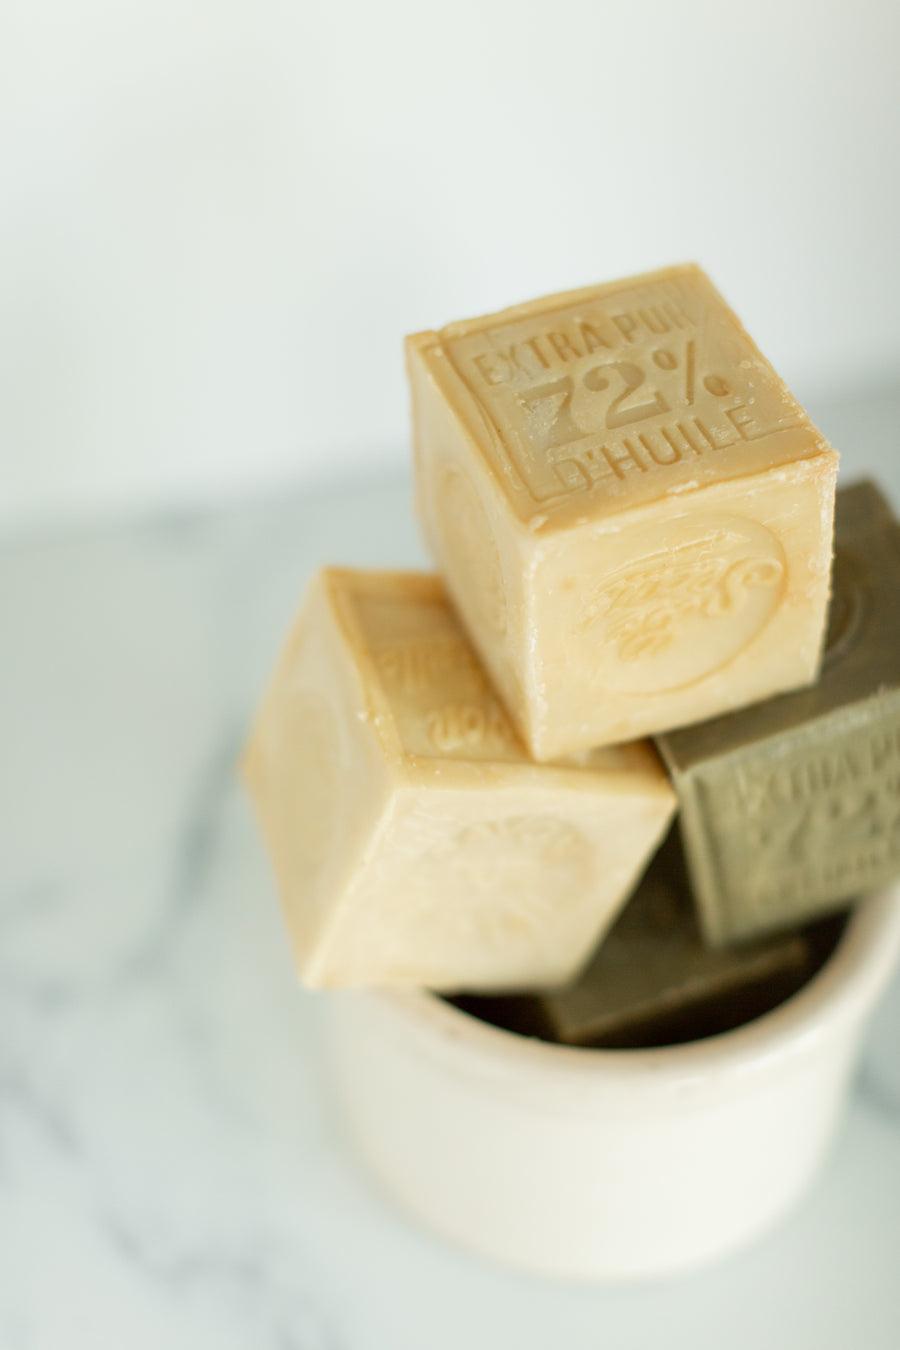 Authentic Soap of Marseille | White